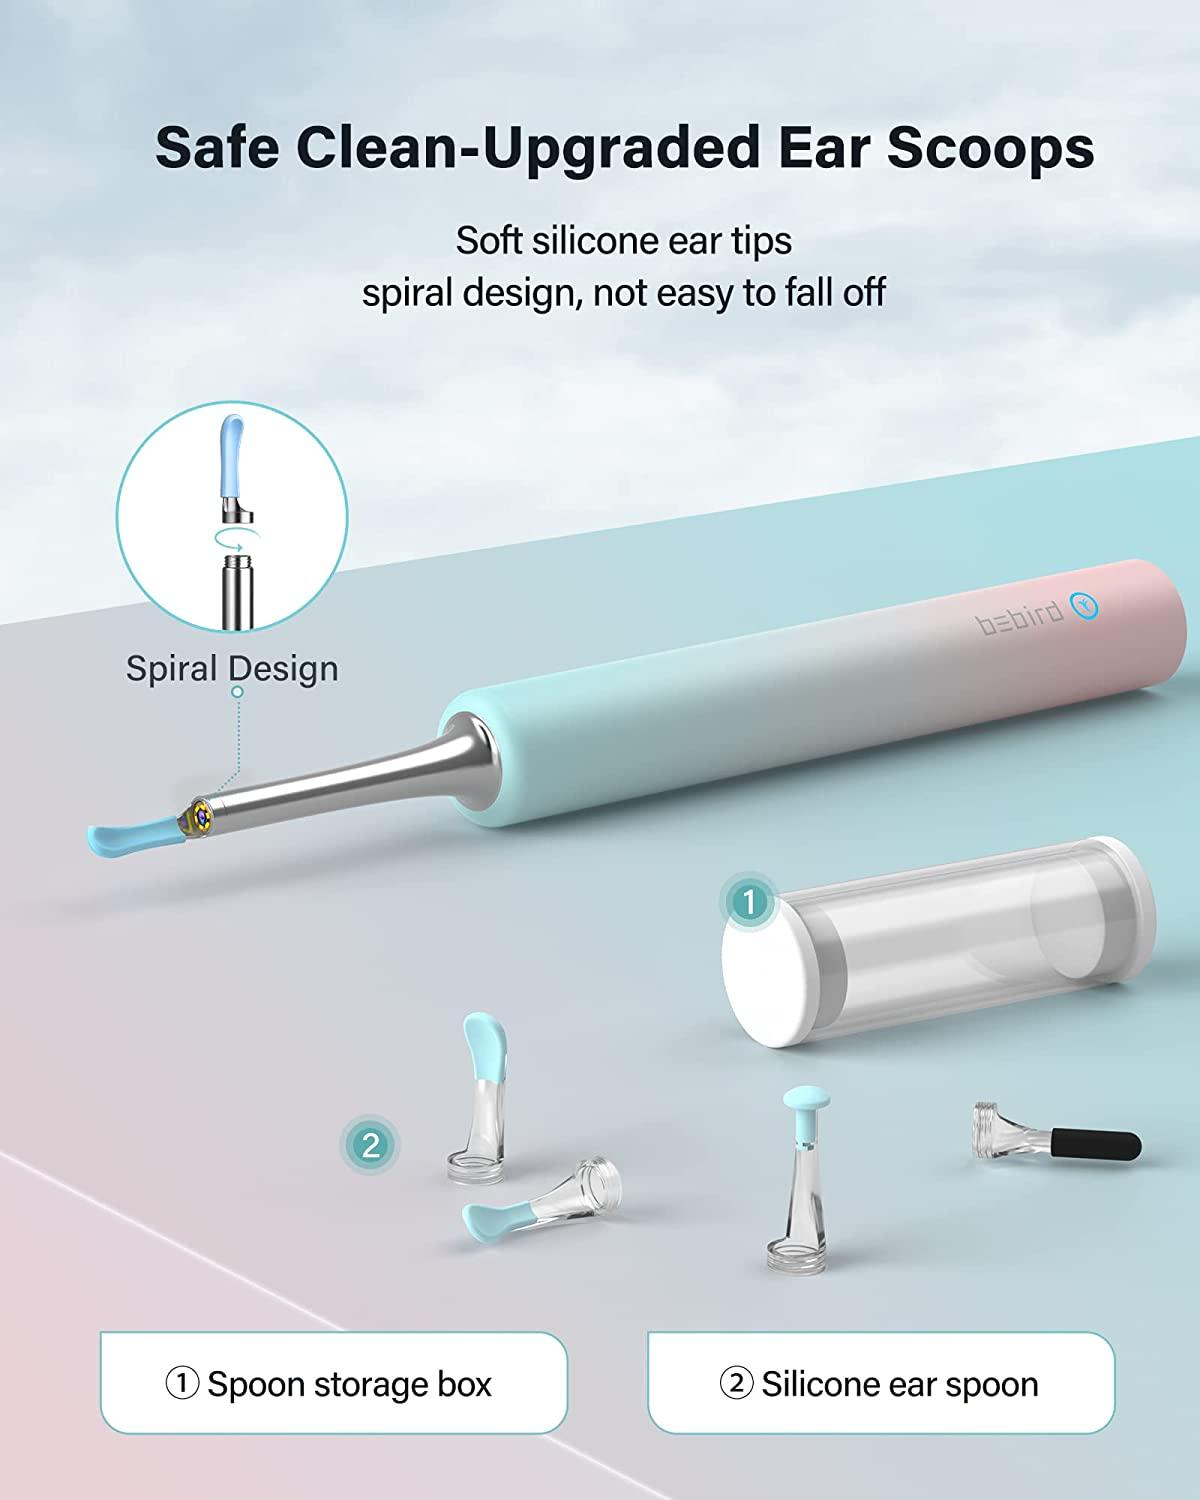 Ear Wax Removal,Ear Cleaner Kit with 1080P,Ear Wax Removal Tool with  Light,Ear Camera Otoscope,Ear Cleaning Tool for iPhone, iPad, Android